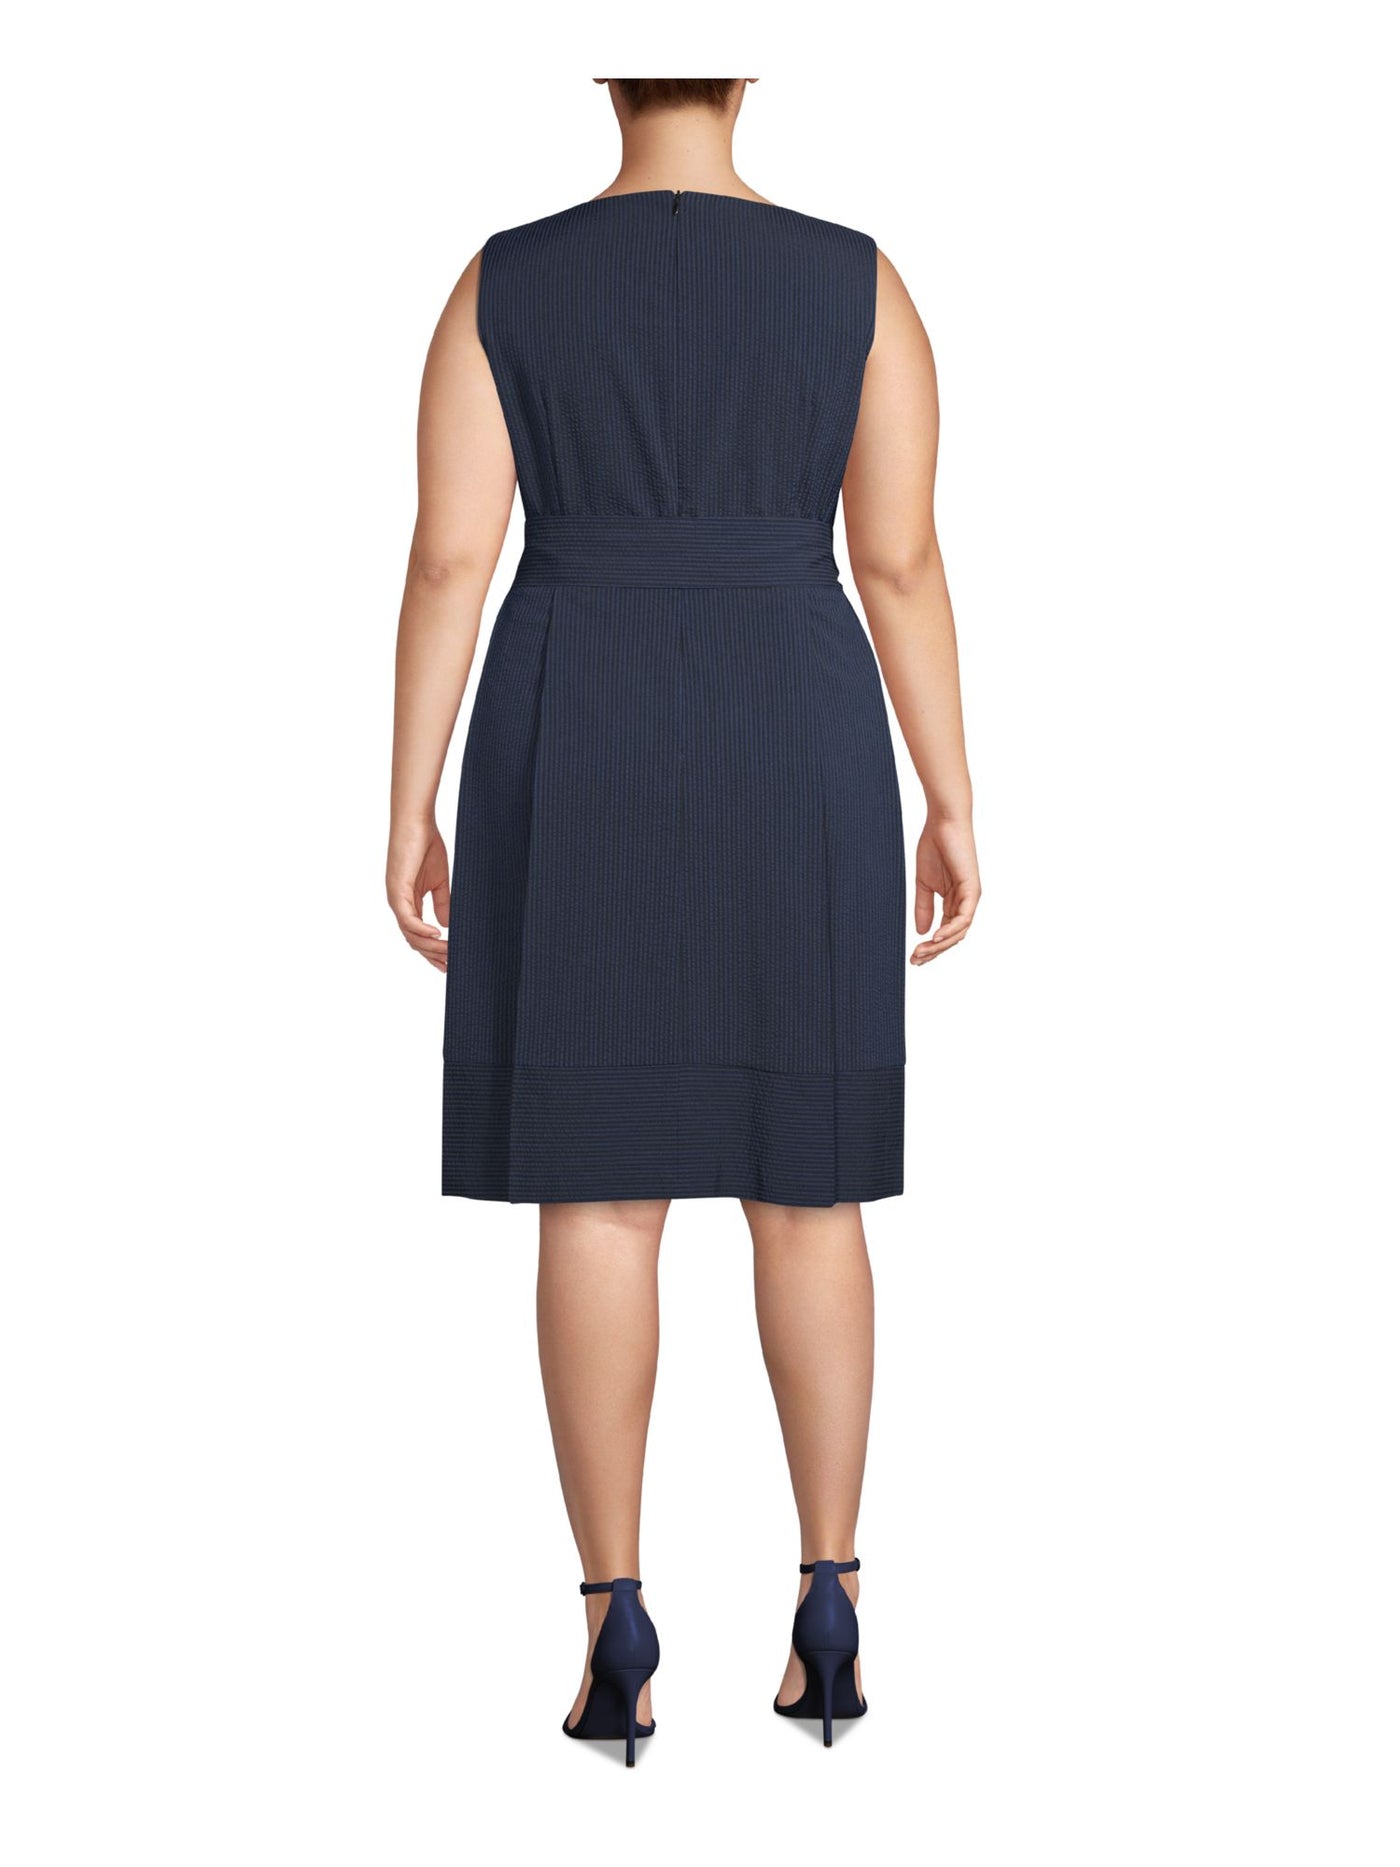 ANNE KLEIN Womens Navy Sleeveless Boat Neck Above The Knee Wear To Work Fit + Flare Dress Plus 24W